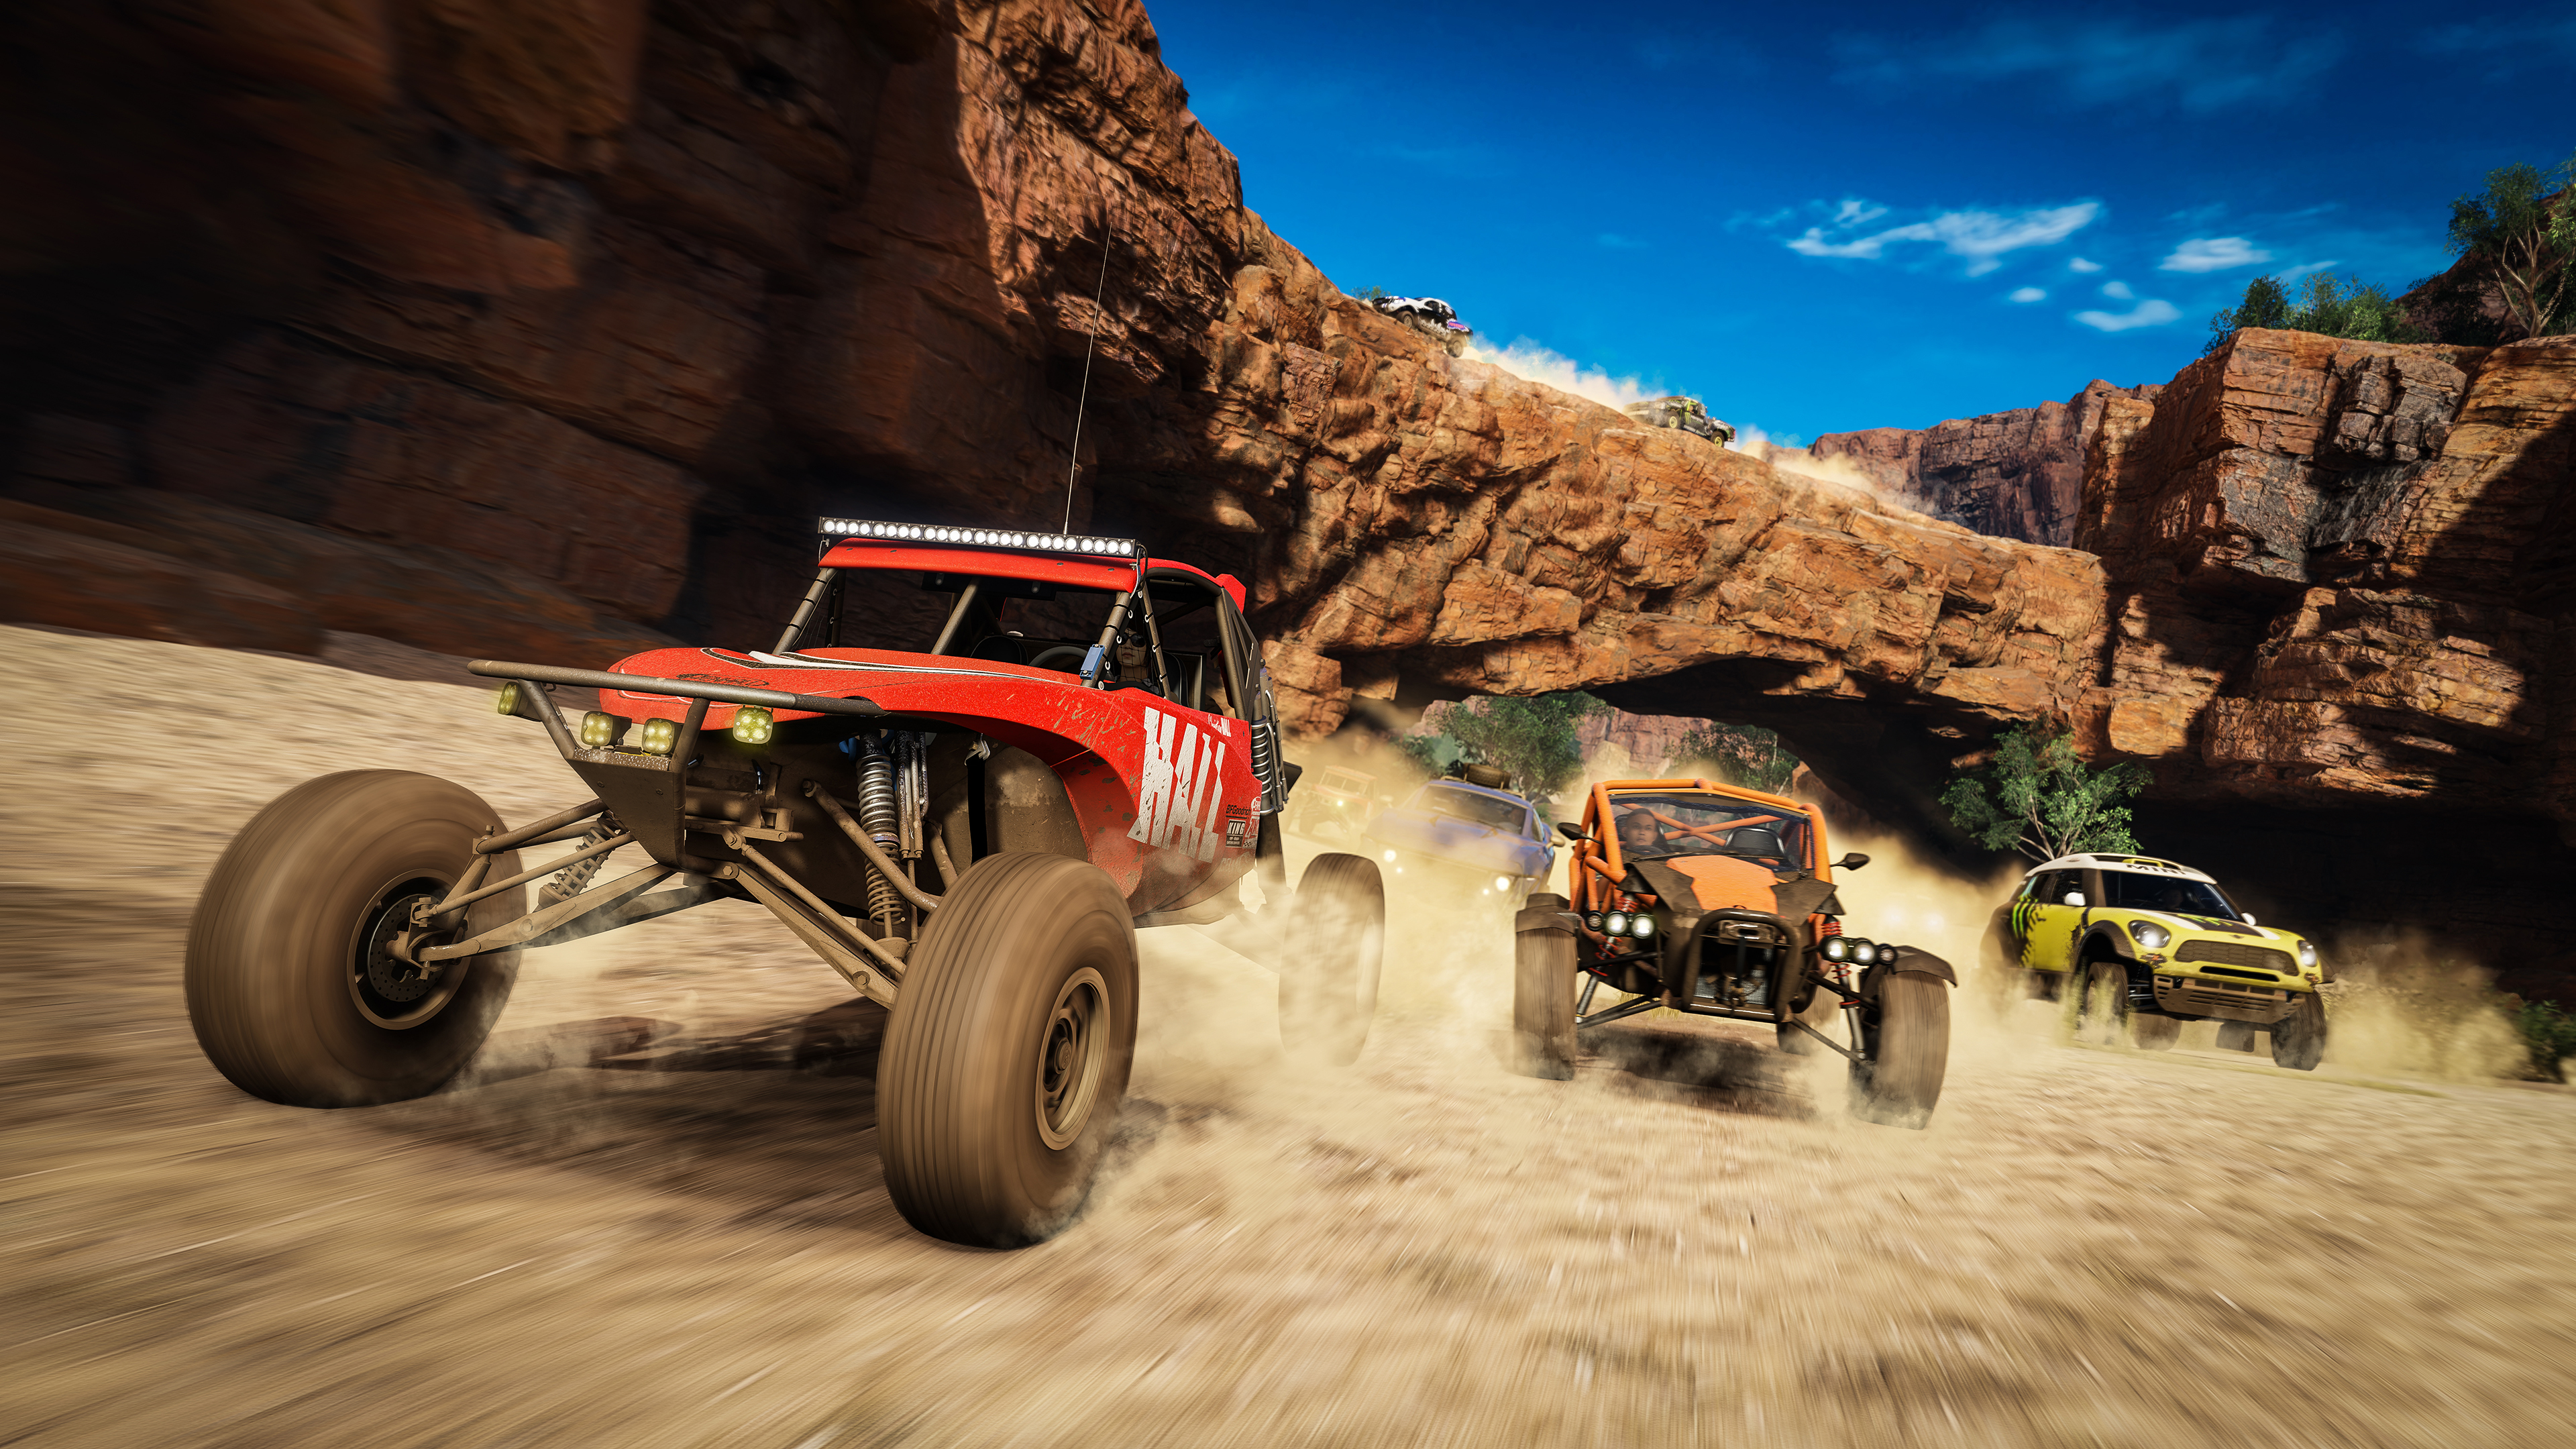 Forza Horizon 3  Forza Horizon 3 features the tremendous diversity and stunning natural beauty of Australia, and recreating that world in the game has been a true labor of love. From lush tropical rain forests, to the arid, wide-open Outback, the goal is to give players a beautiful and exciting playground to explore and enjoy with their friends. That meant spending lots of time in Australia to study the richness of the country, including capturing real skies via a custom camera rig developed by the team. Whether you’re speeding under a canopy of stars or taking a moment to enjoy thunderheads rolling in over Byron Bay, every time you hit the highways and backroads in Forza Horizon 3, you’re driving under real Australian skies. 
                              
                              - Playground Games